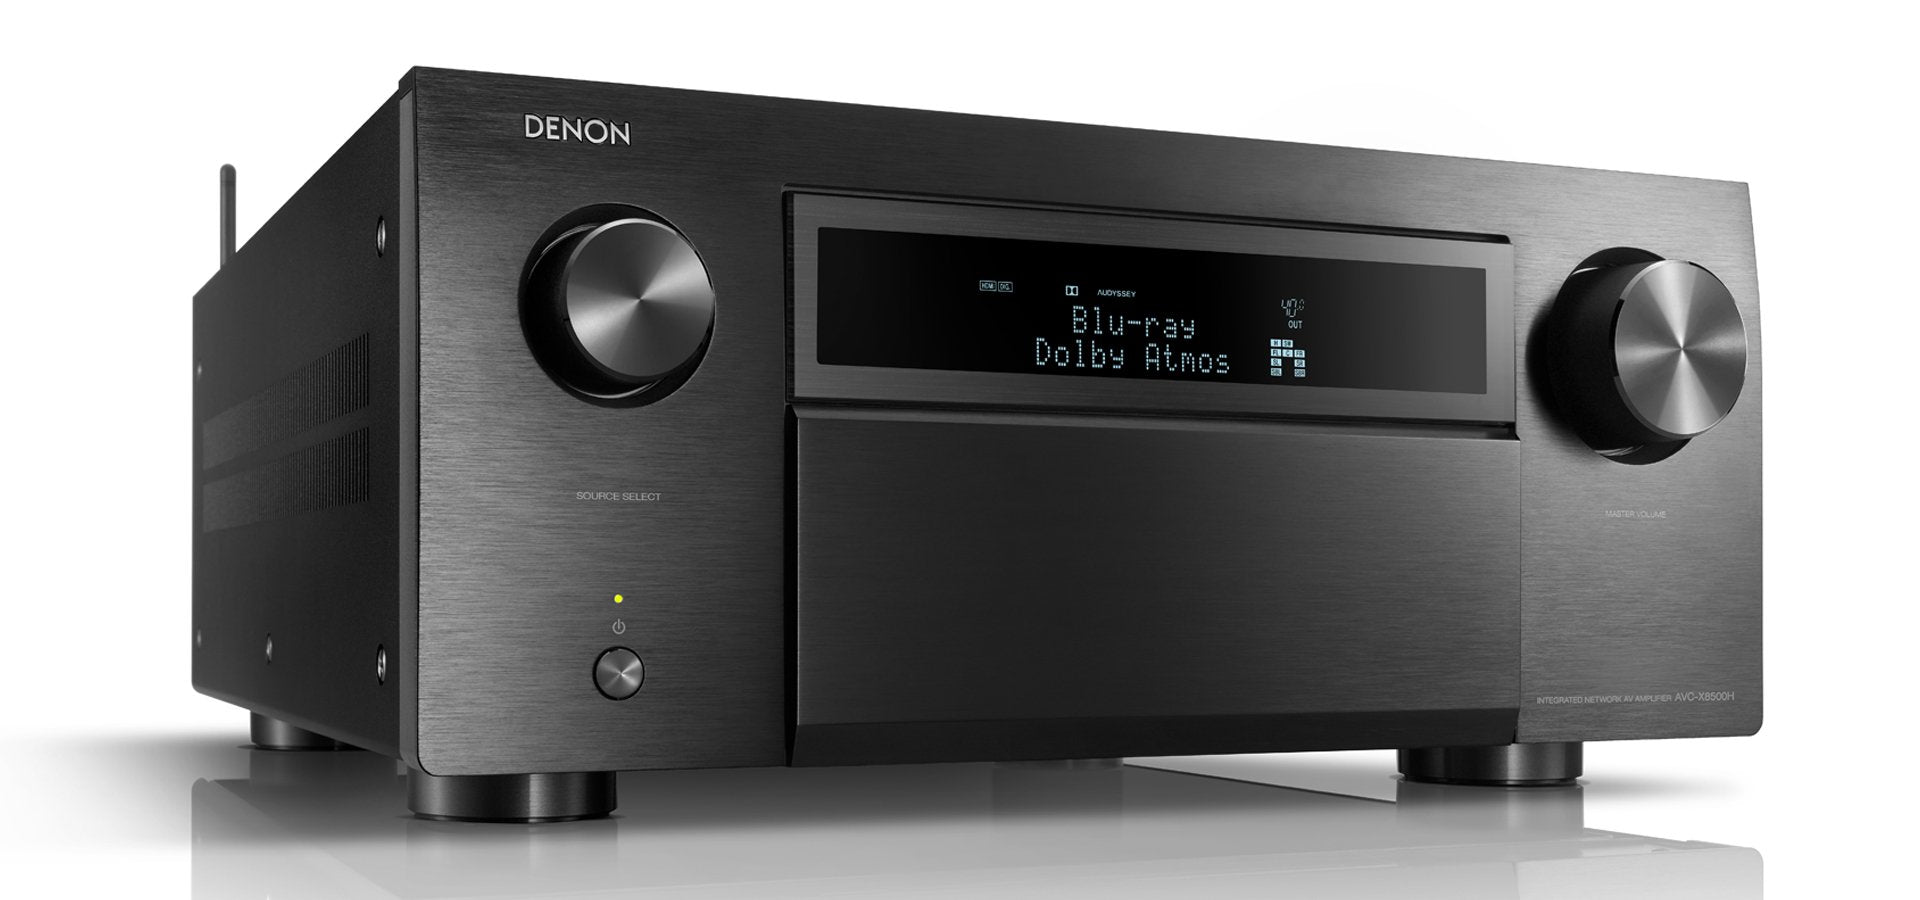 Denon AVC-X8500H FLAGSHIP. THE WORLDâ€™S FIRST 13.2 CHANNEL AV AMPLIFIER with HEOS Built-in - Fine Fidelity